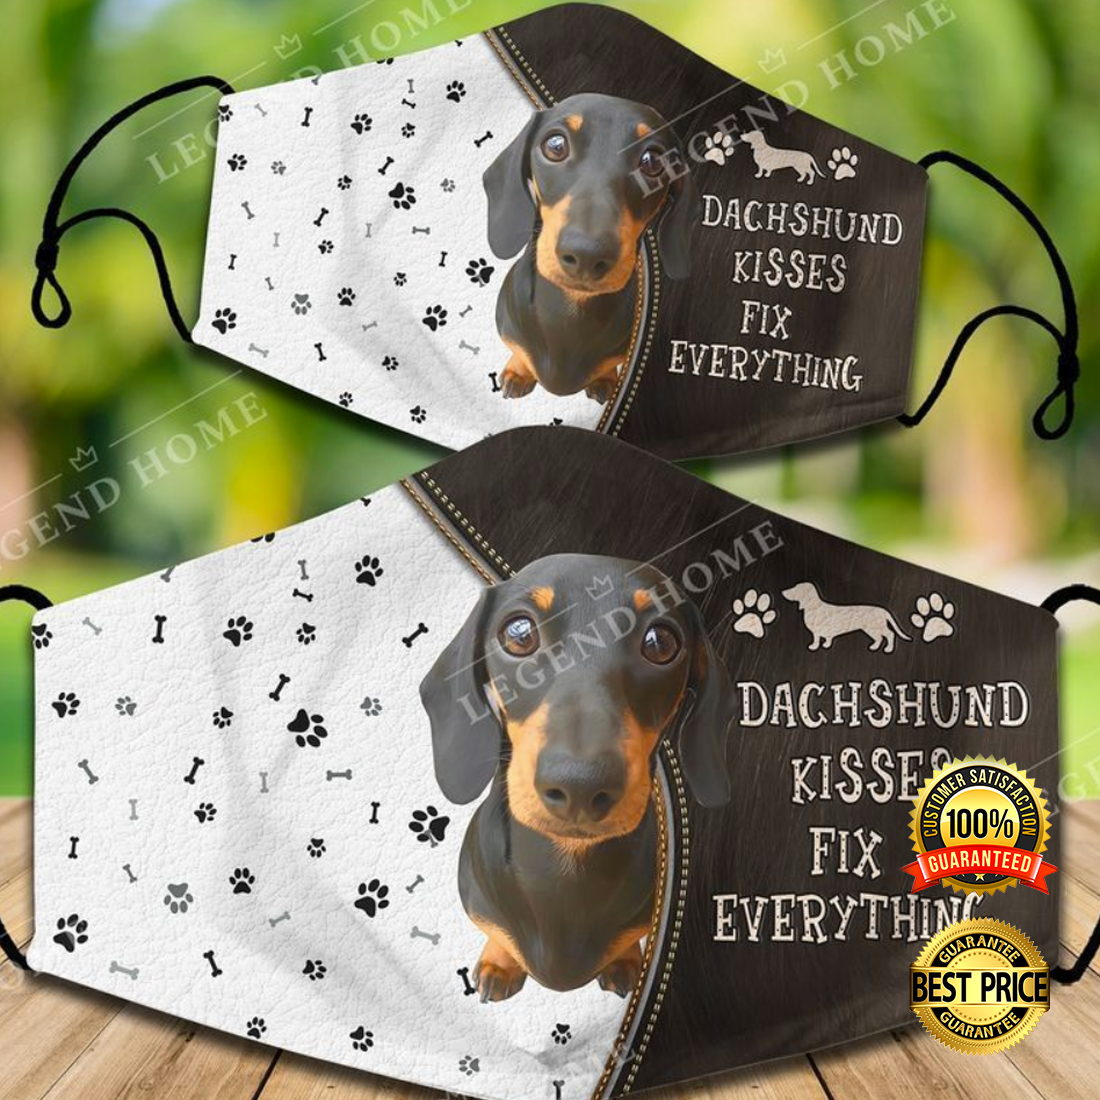 Dachshund kisses fix everything face mask 3